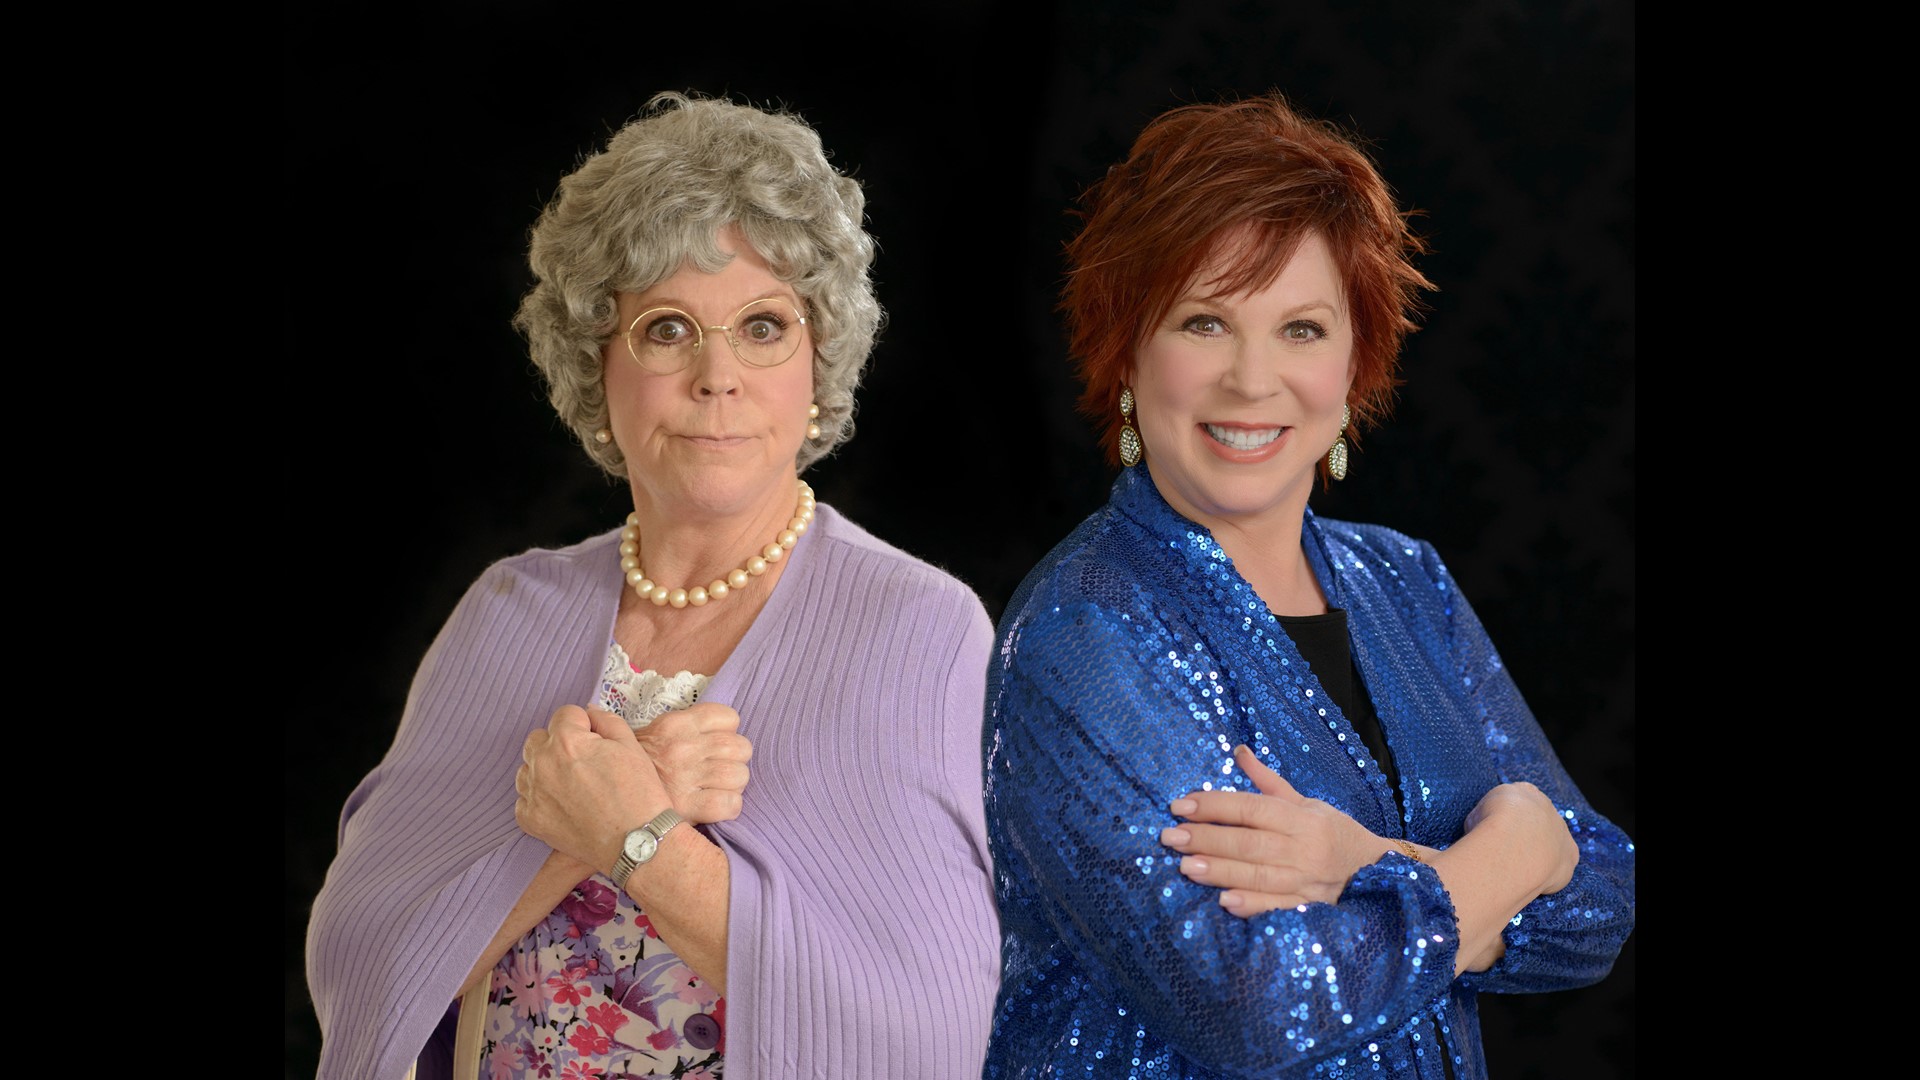 We are giving 5 winners 4 tickets to the Vicki Lawrence performance at the Lindenwood J. Scheidegger Center.